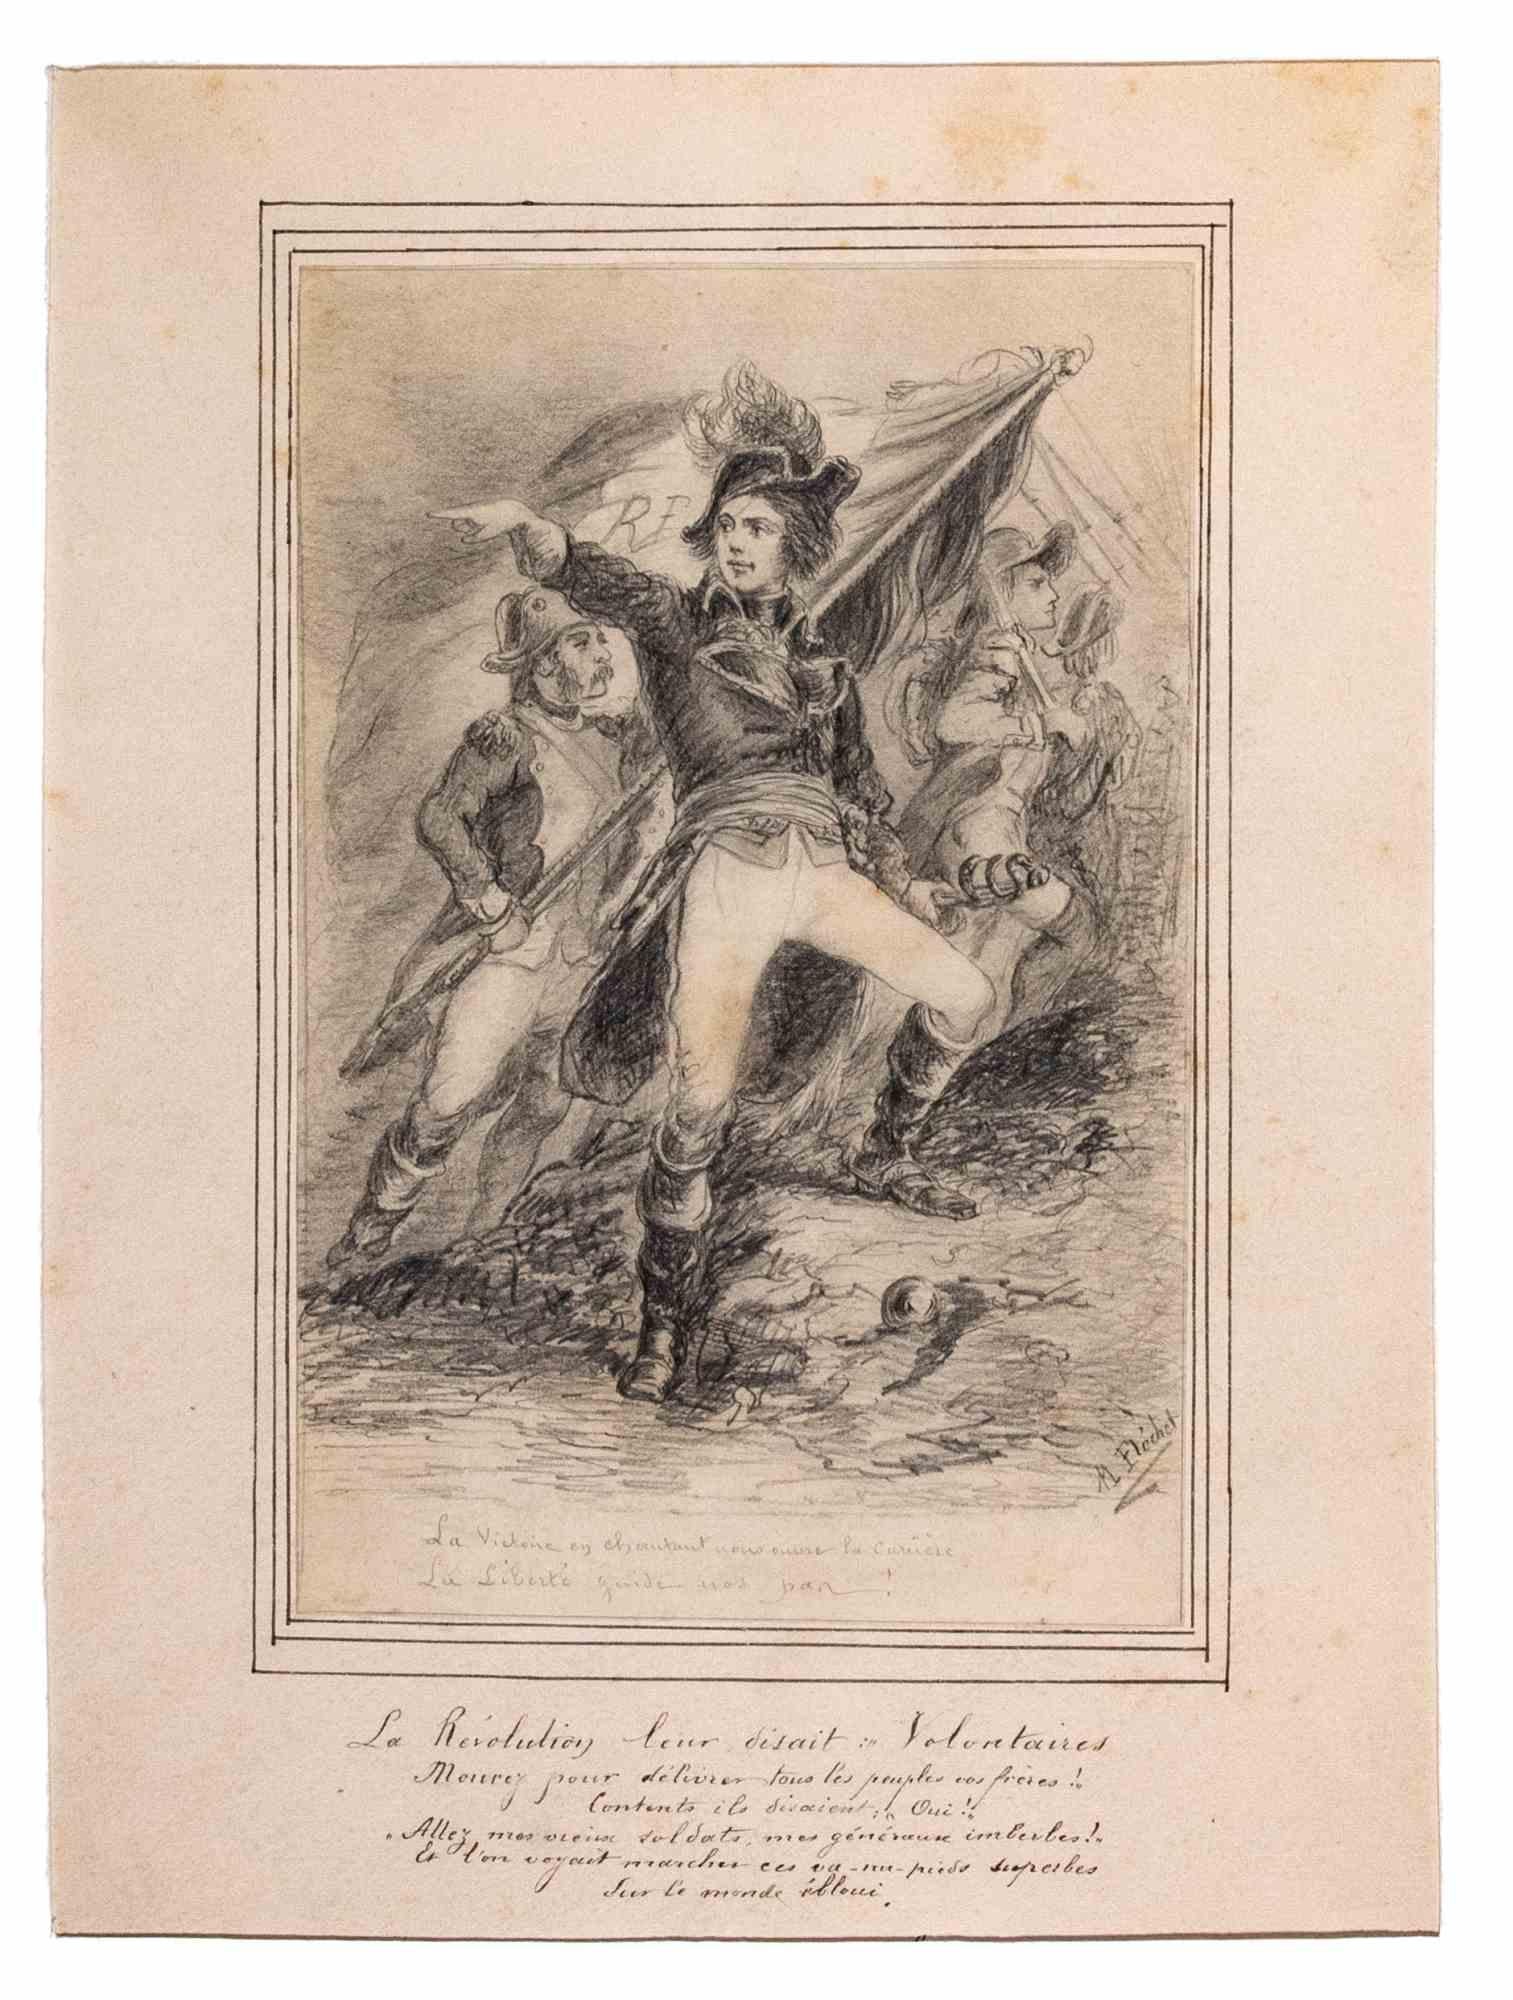 La libertè guide nos jour is an original artwork realized by French artist  Marc Flèchet  (19th-20th). He was a painter, engraver and illustrator.

Etching print, signed on plate on the lower right, titled. There is on the lower center a script by